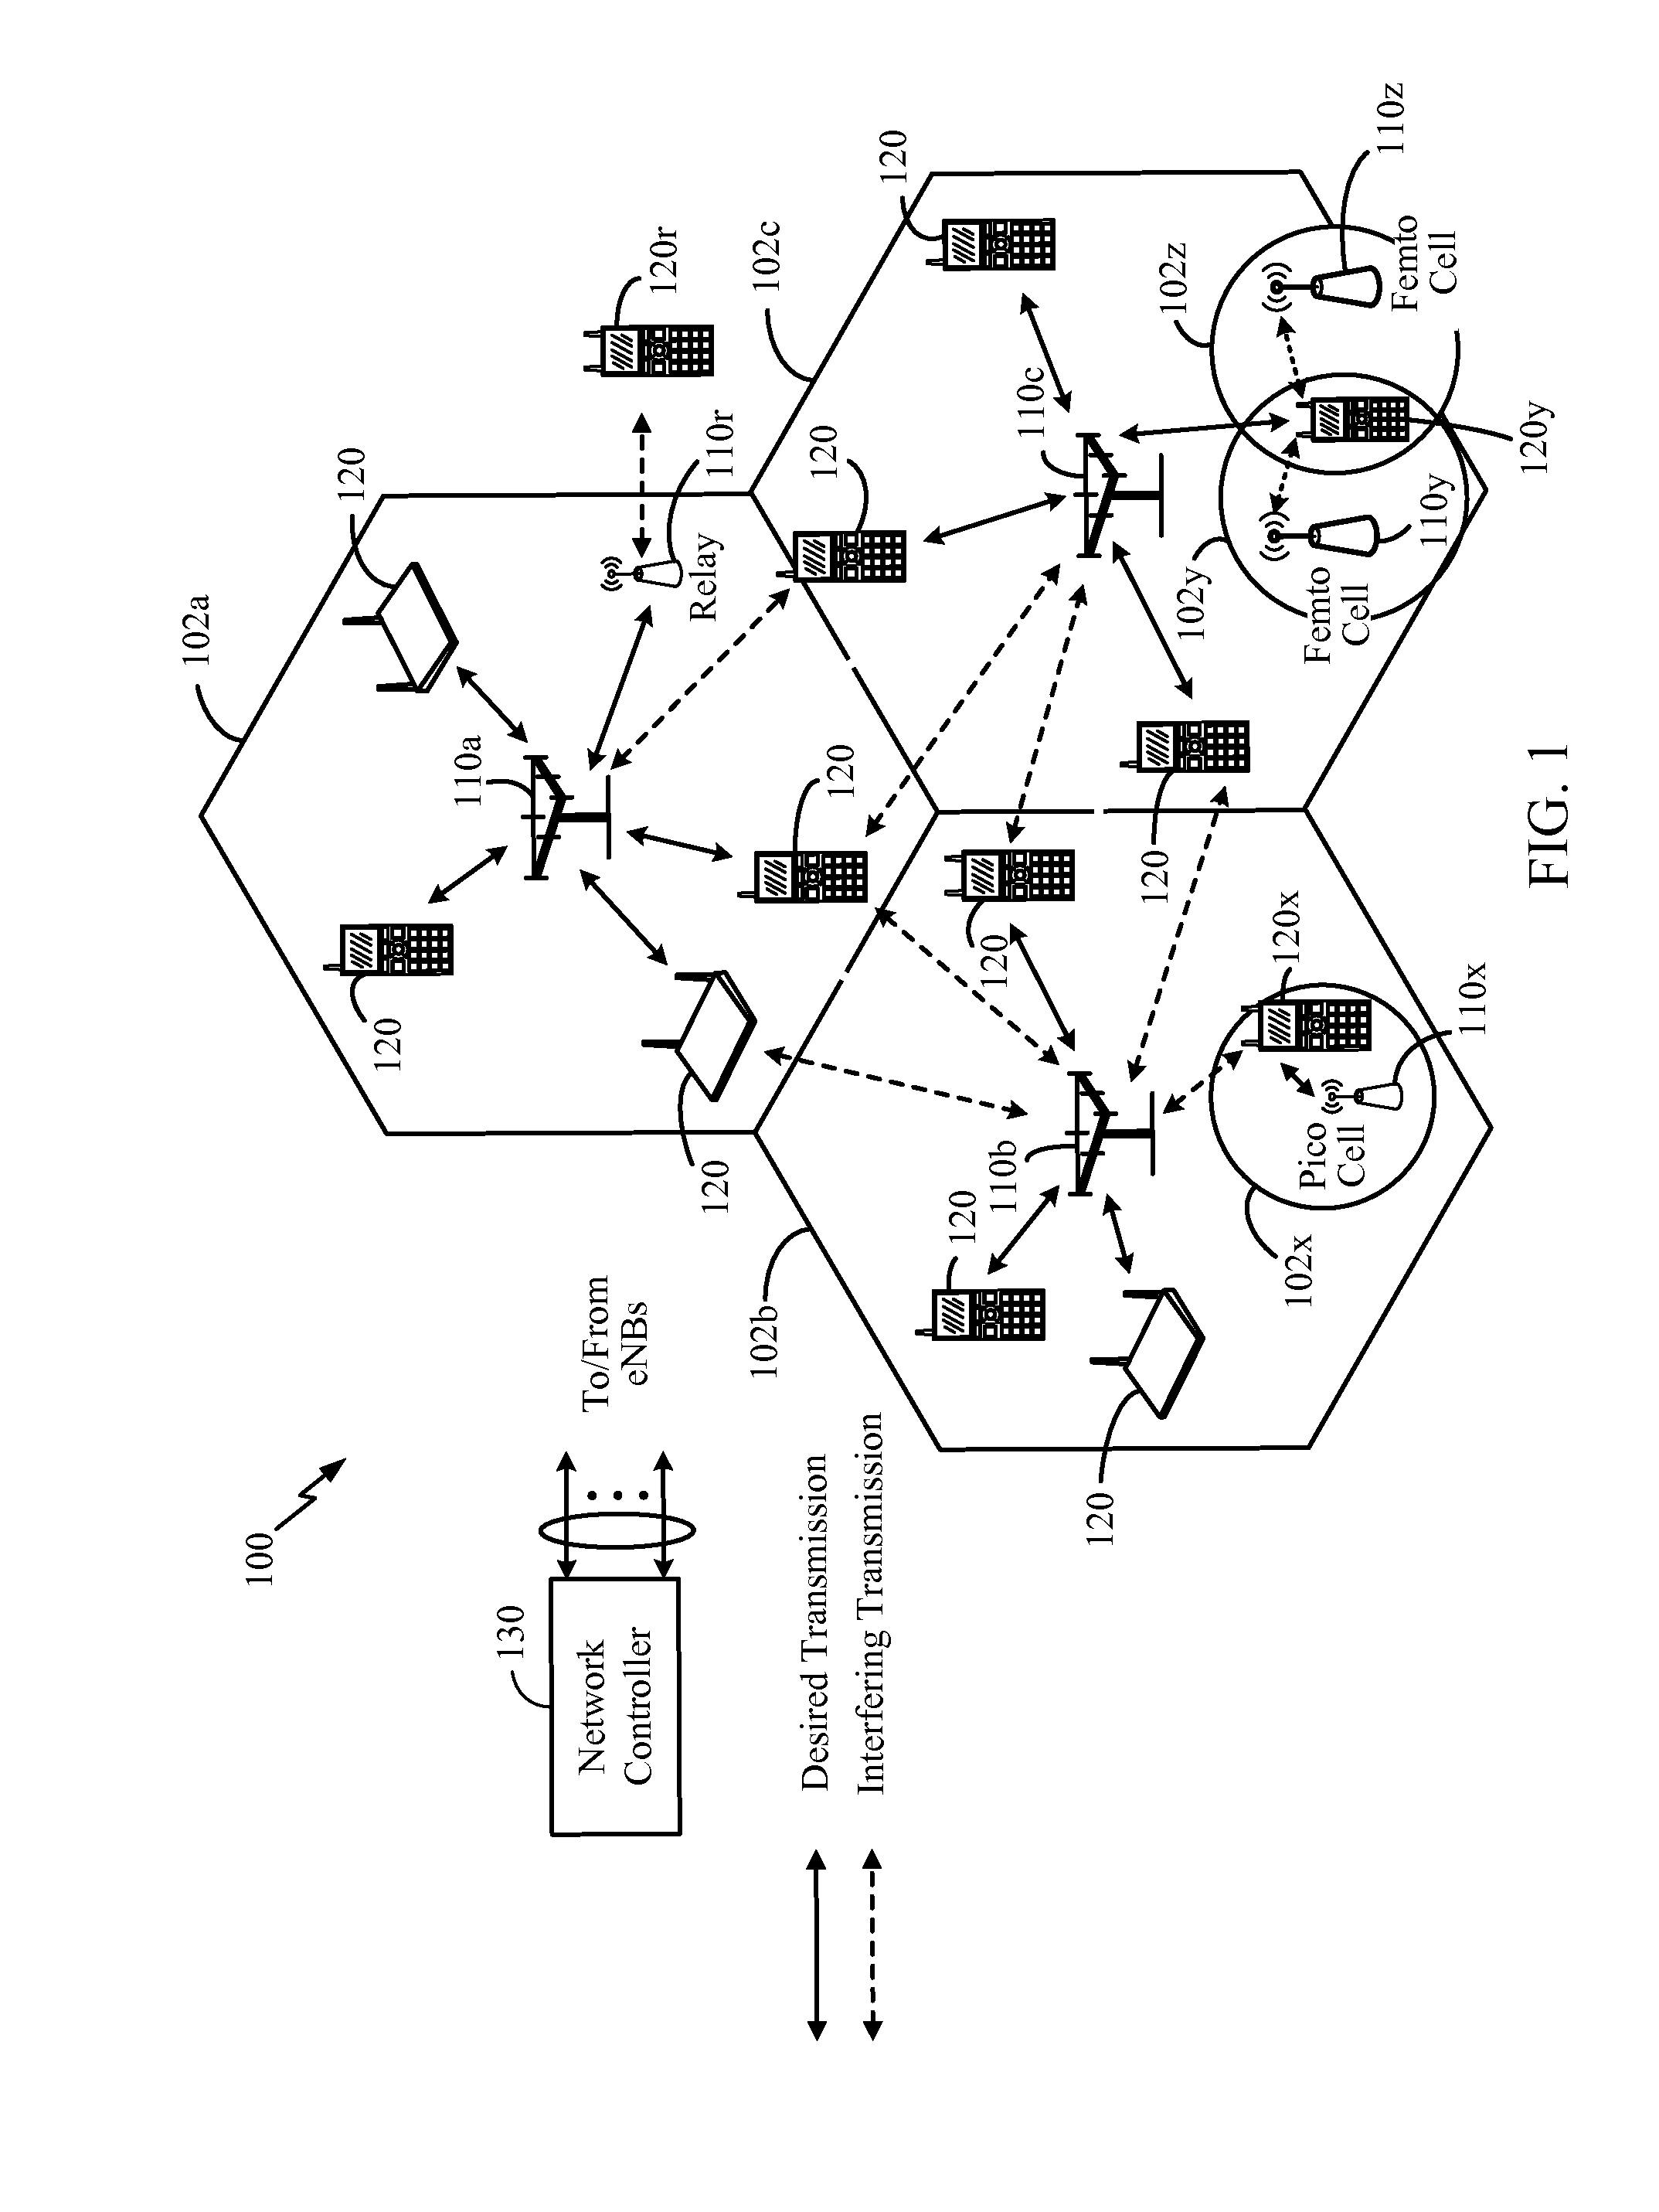 Power control and user multiplexing for heterogeneous network coordinated multipoint operations